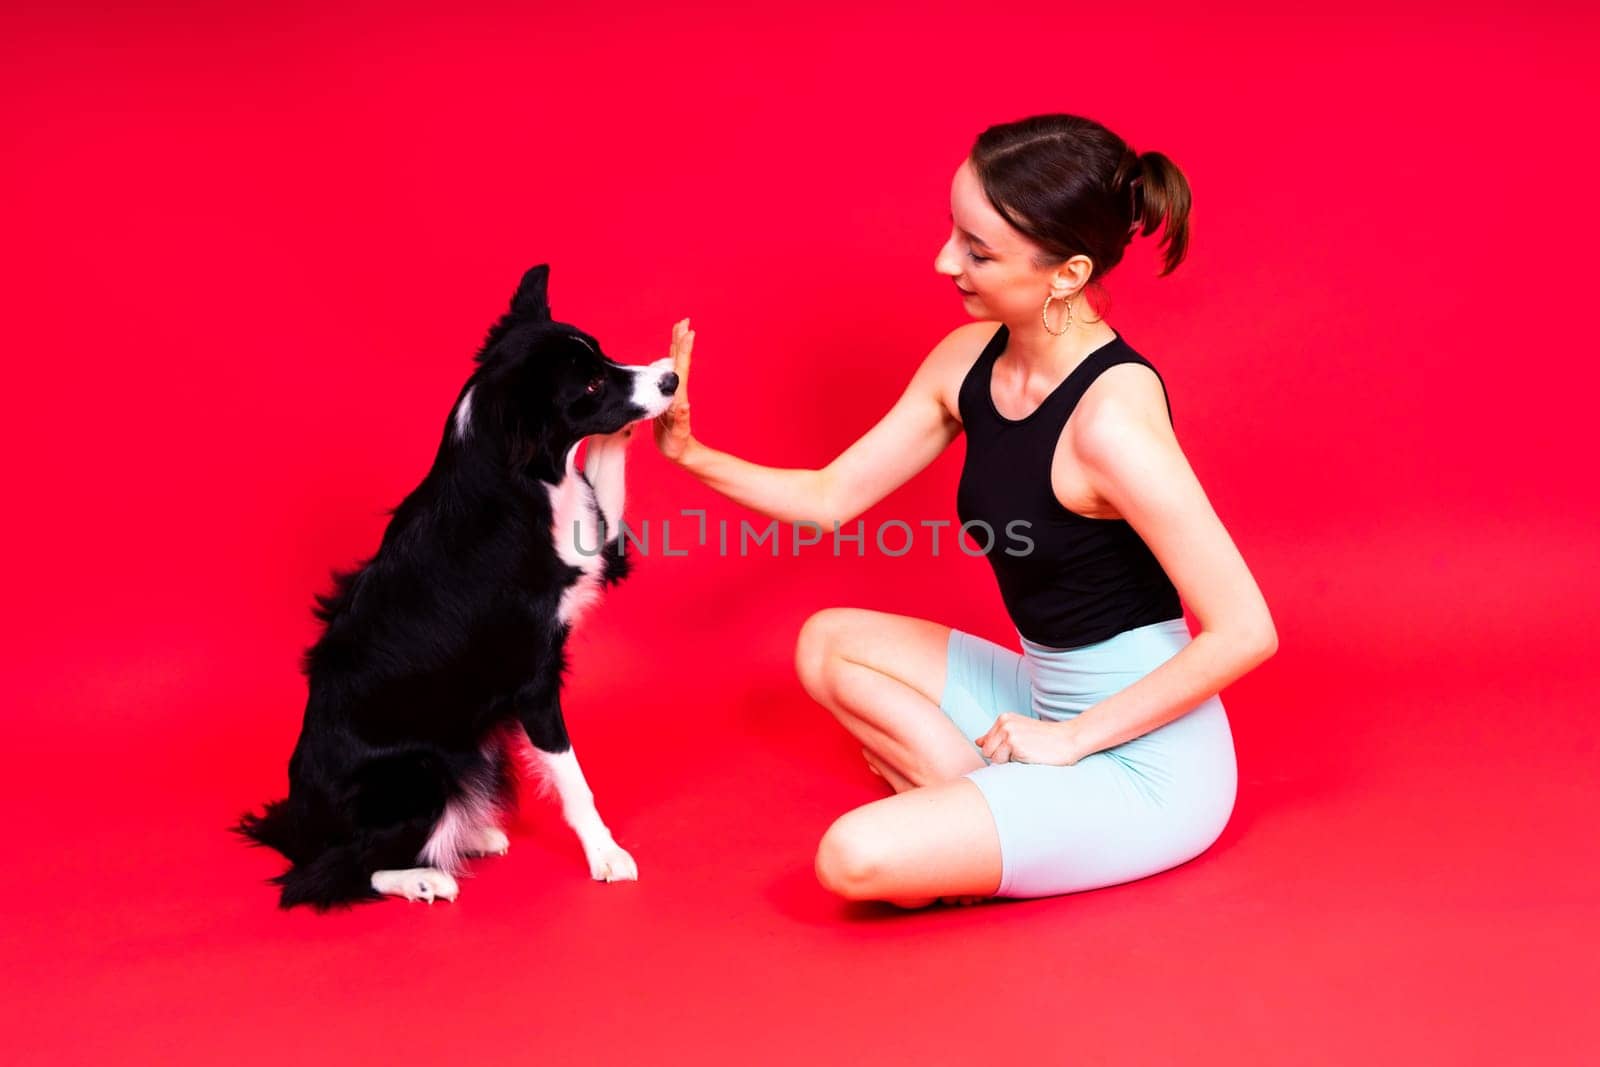 Puppy learning to obey. Dog training, owner giving prize to dog. Isolated background, border collie by Zelenin